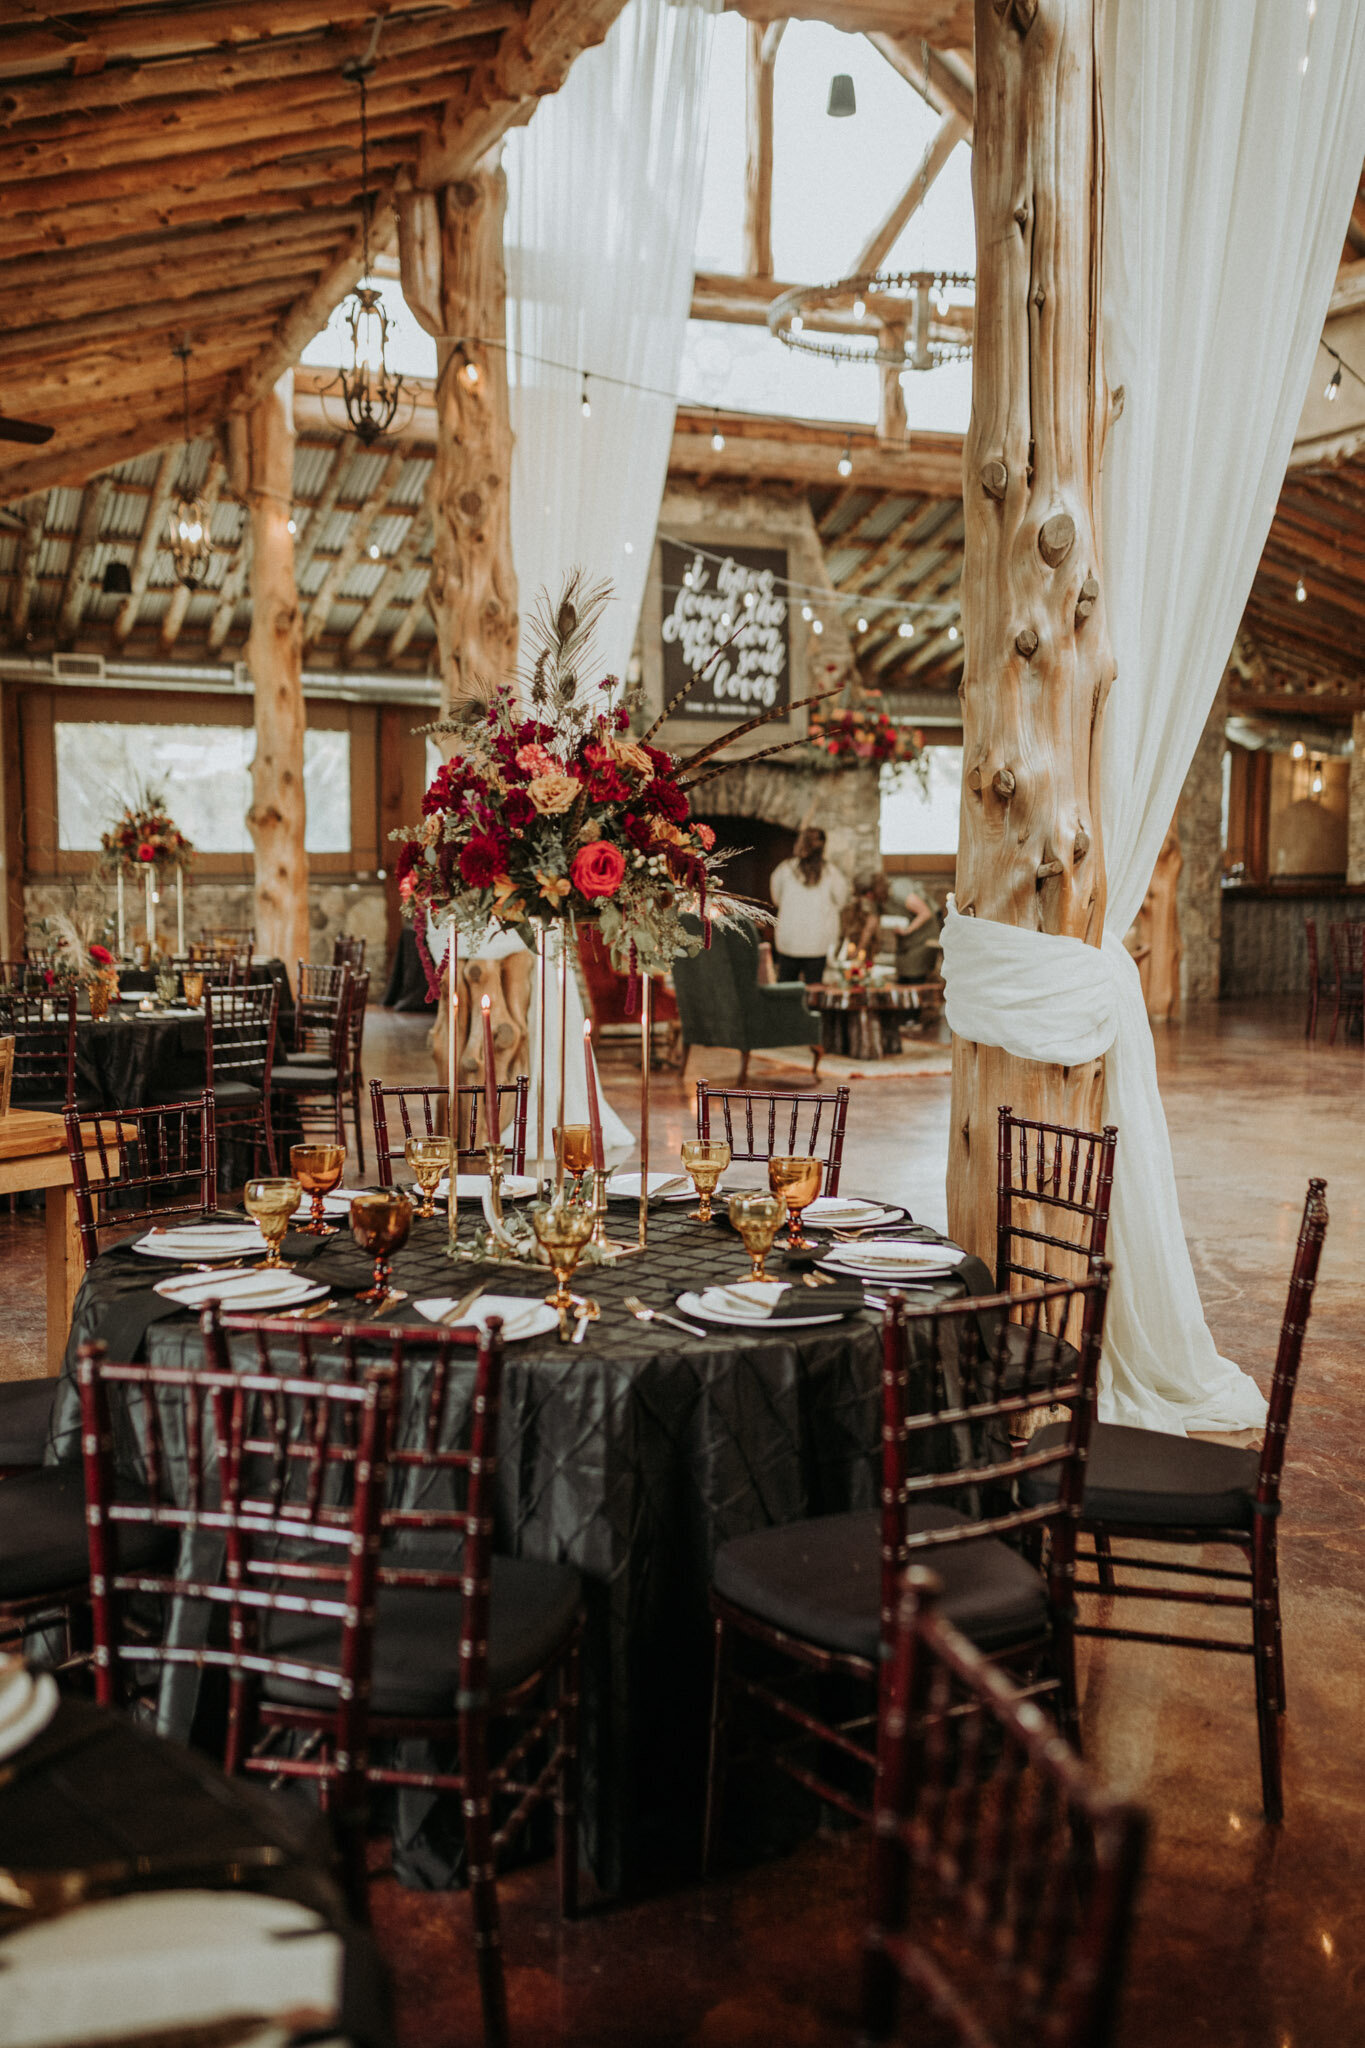 rustic western table at wedding with tall flowers, tablecloths, china, amber glasses